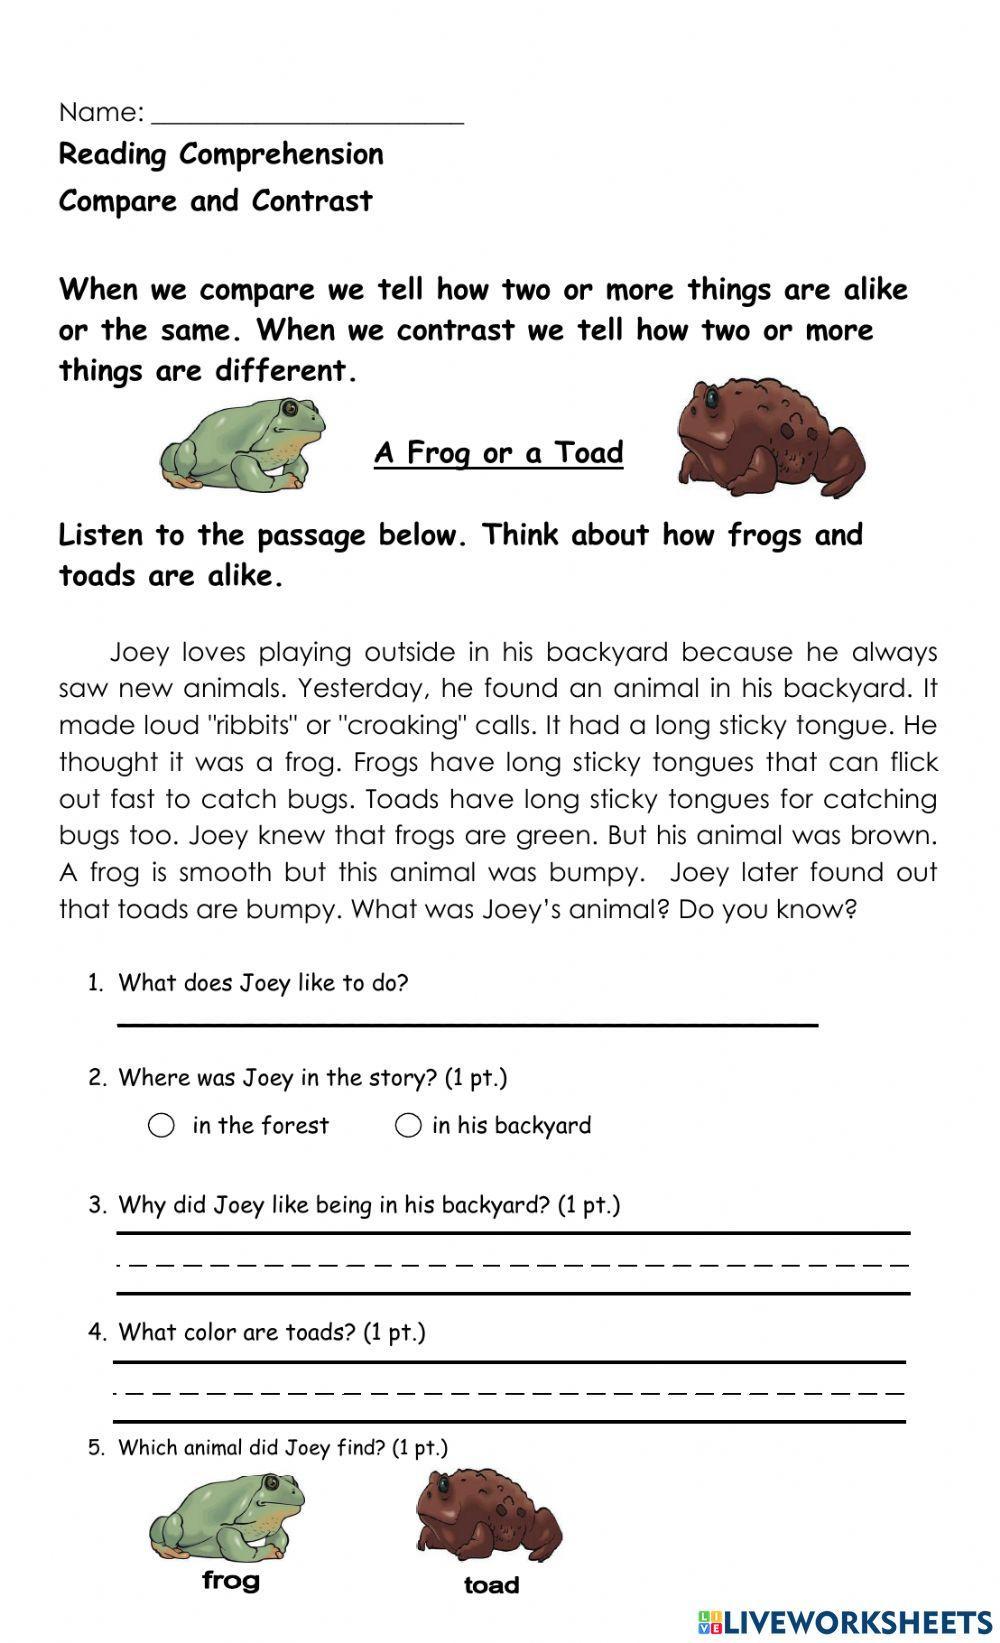 A Frog or Toad